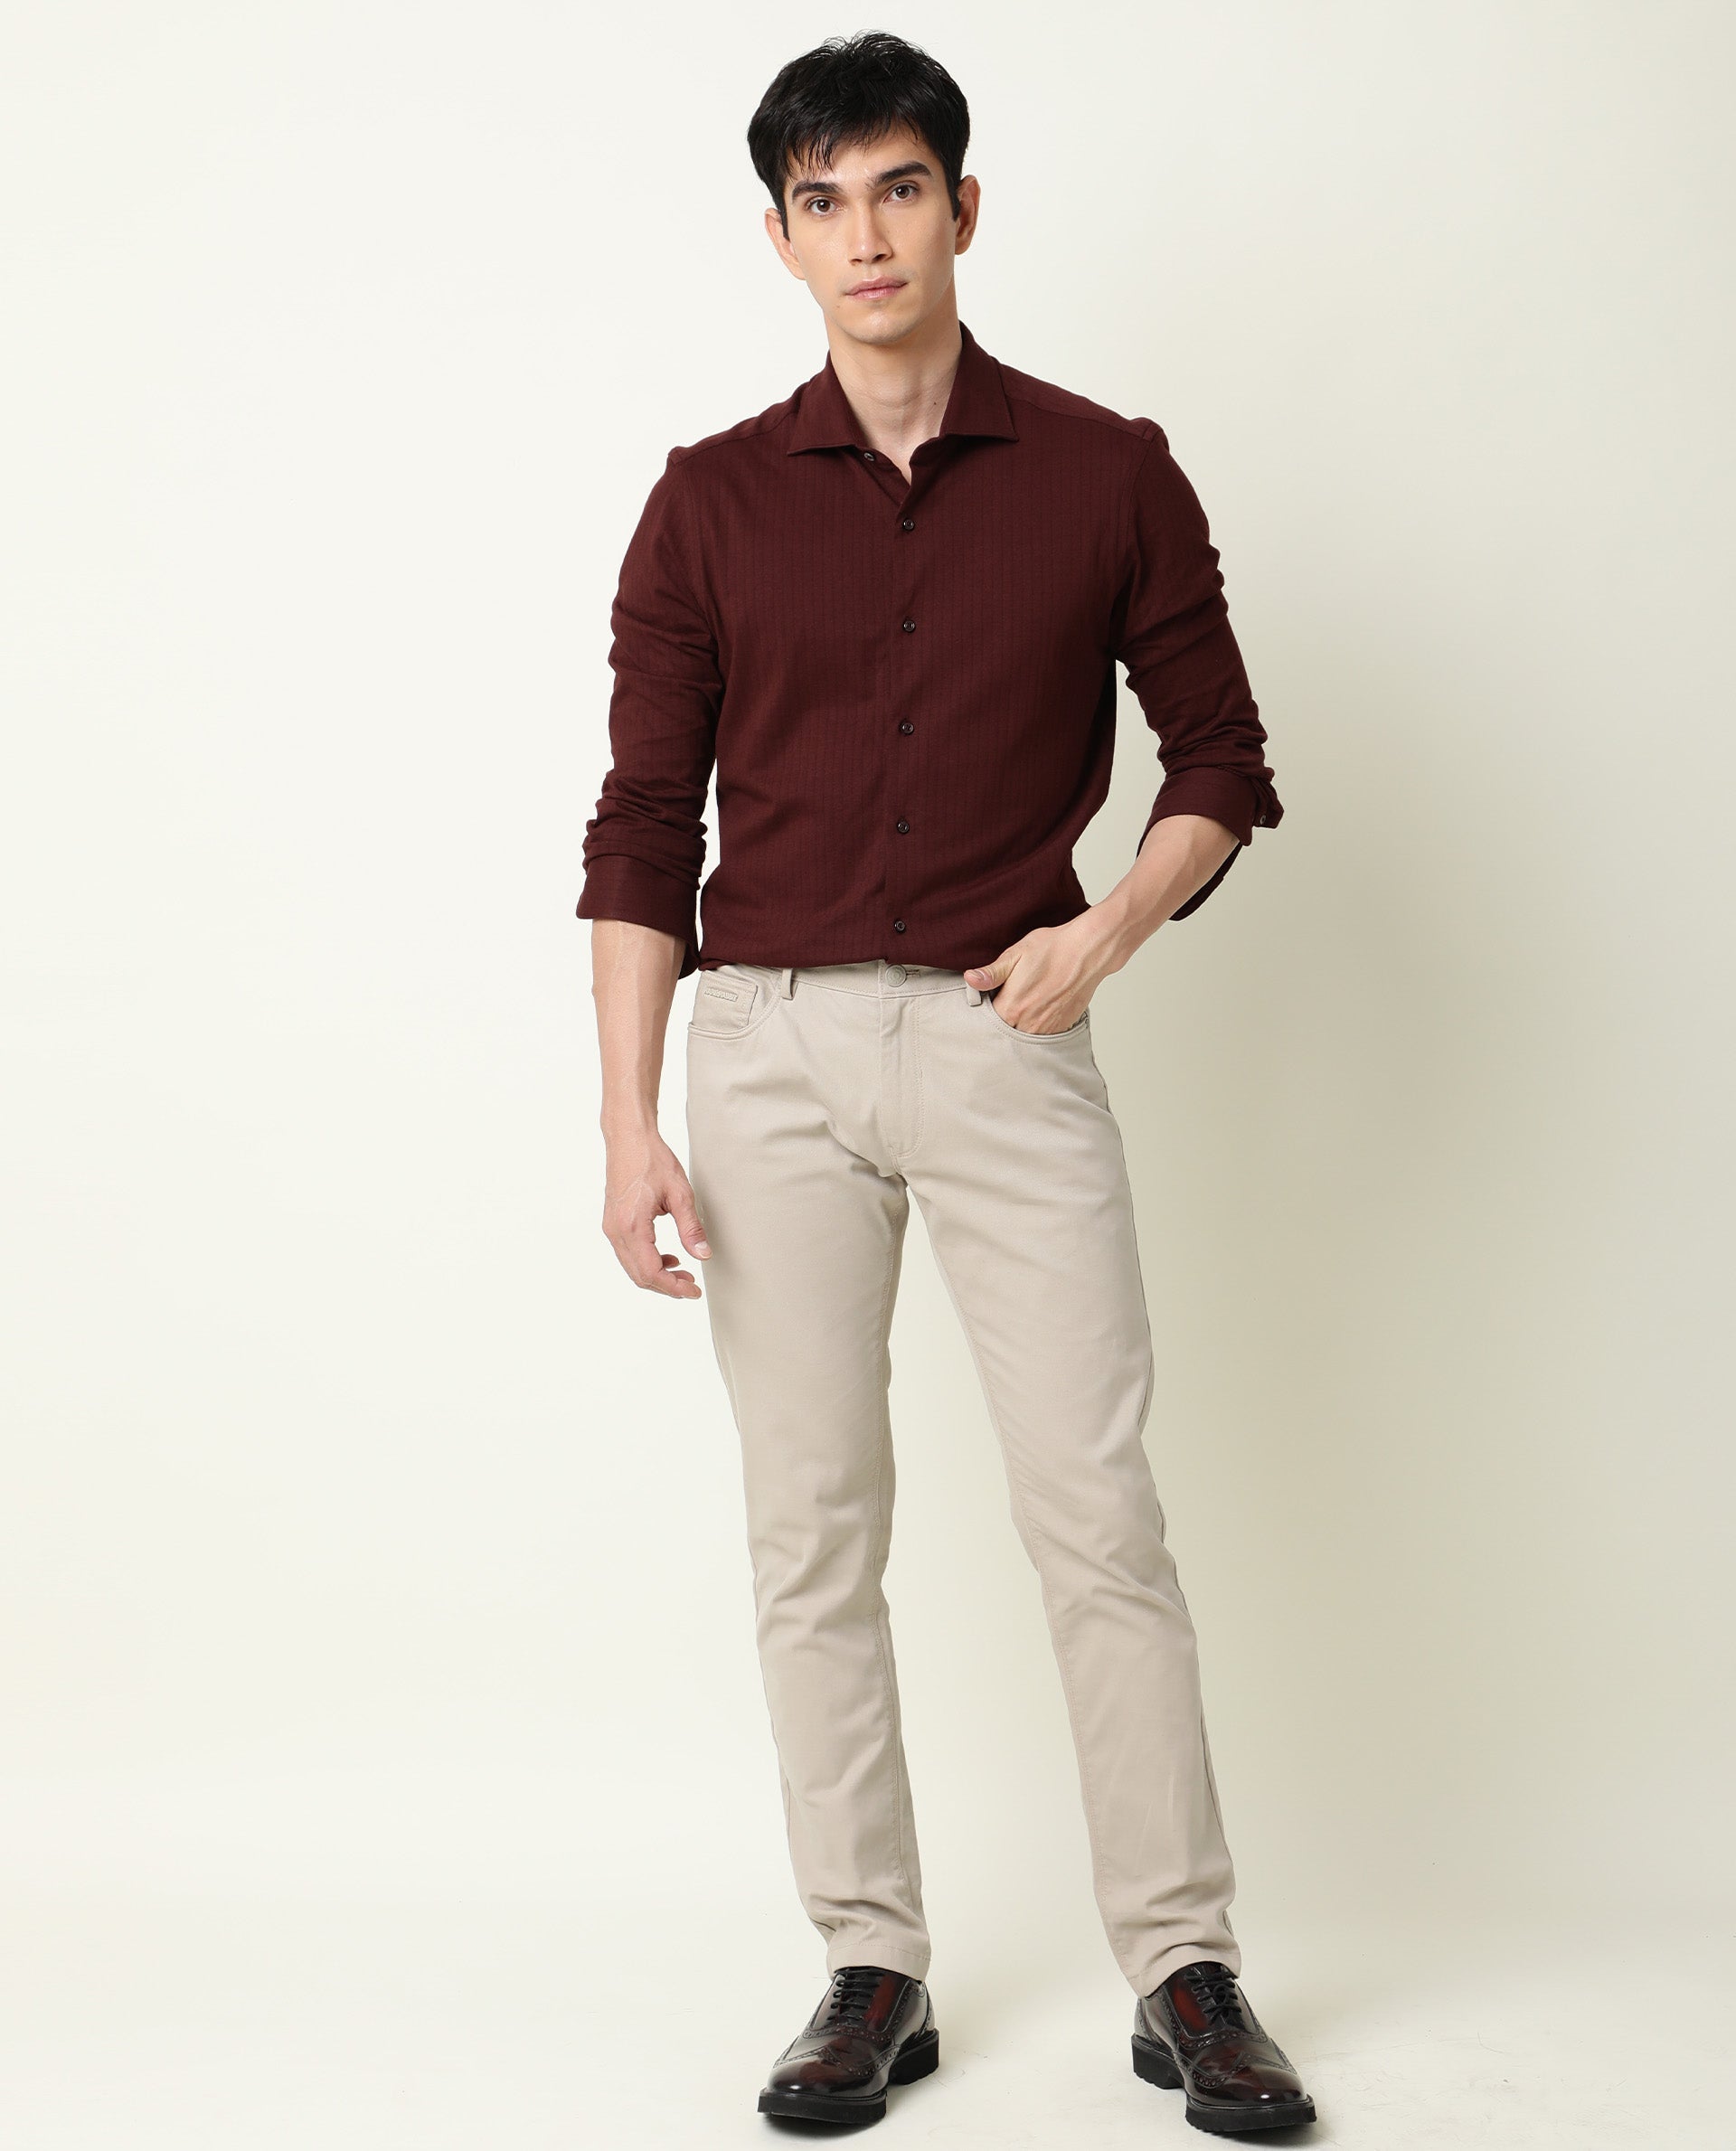 Which colour jeans or trousers go with a maroon shirt  Quora